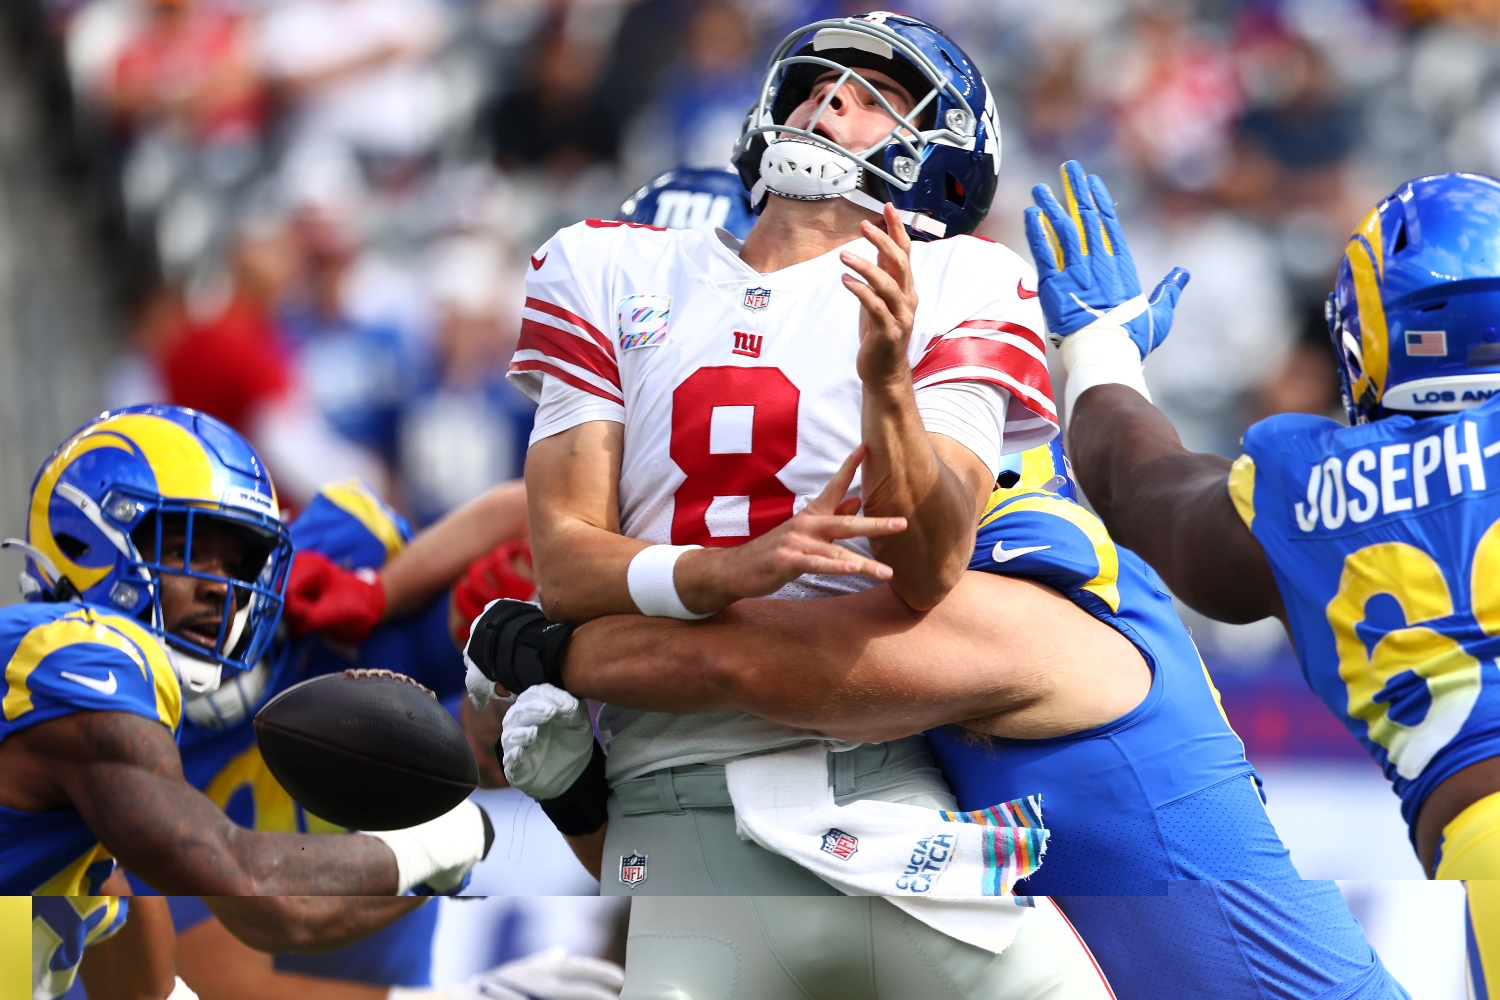 New York Giants QB Daniel Jones gets strip-sacked during a game against the Los Angeles Rams.